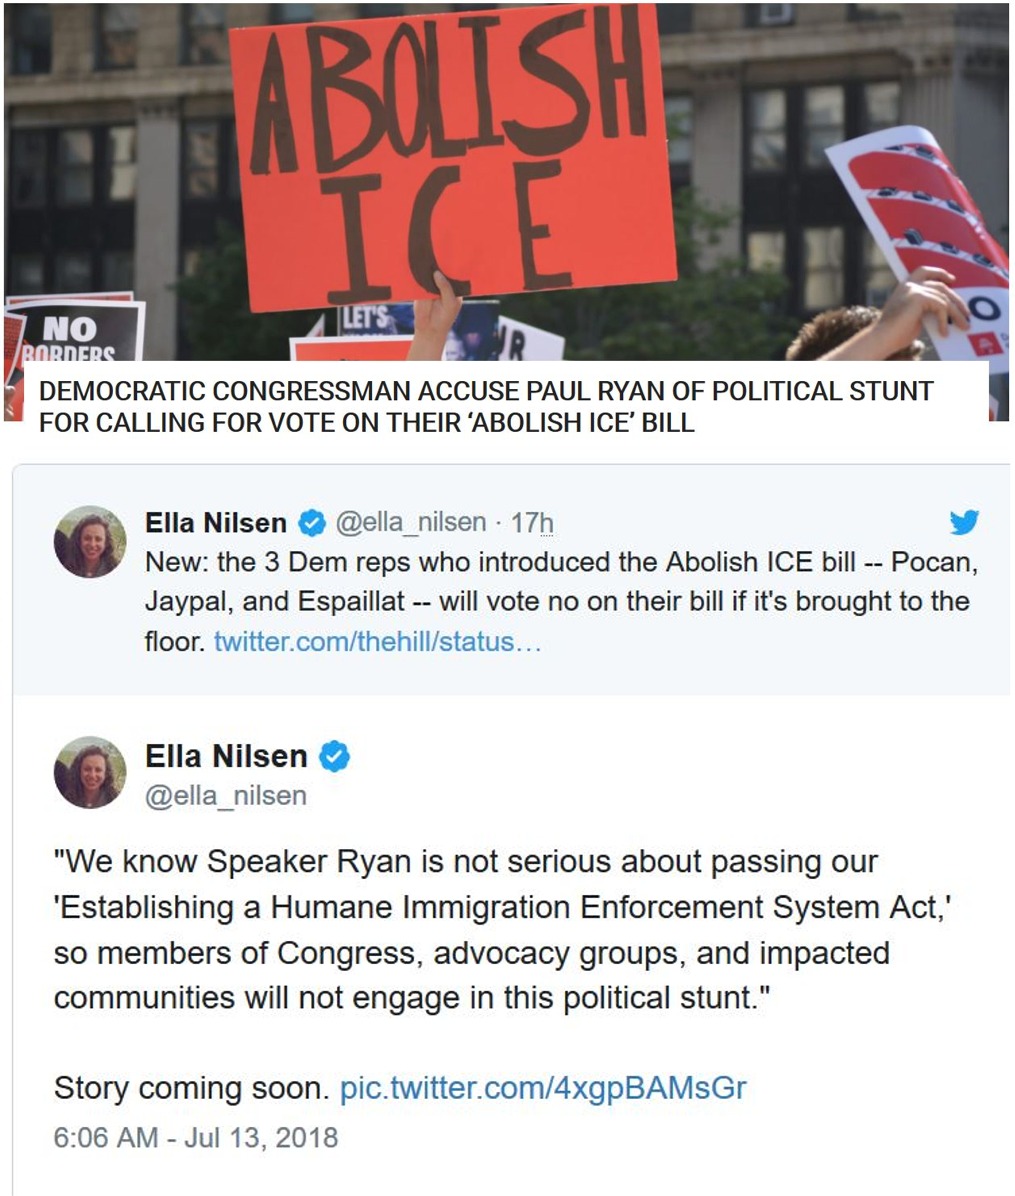 memes - display advertising - Abolish 1 No Borders Democratic Congressman Accuse Paul Ryan Of Political Stunt For Calling For Vote On Their 'Abolish Ice' Bill Ella Nilsen 17h New the 3 Dem reps who introduced the Abolish Ice bill Pocan, Jaypal, and Espail